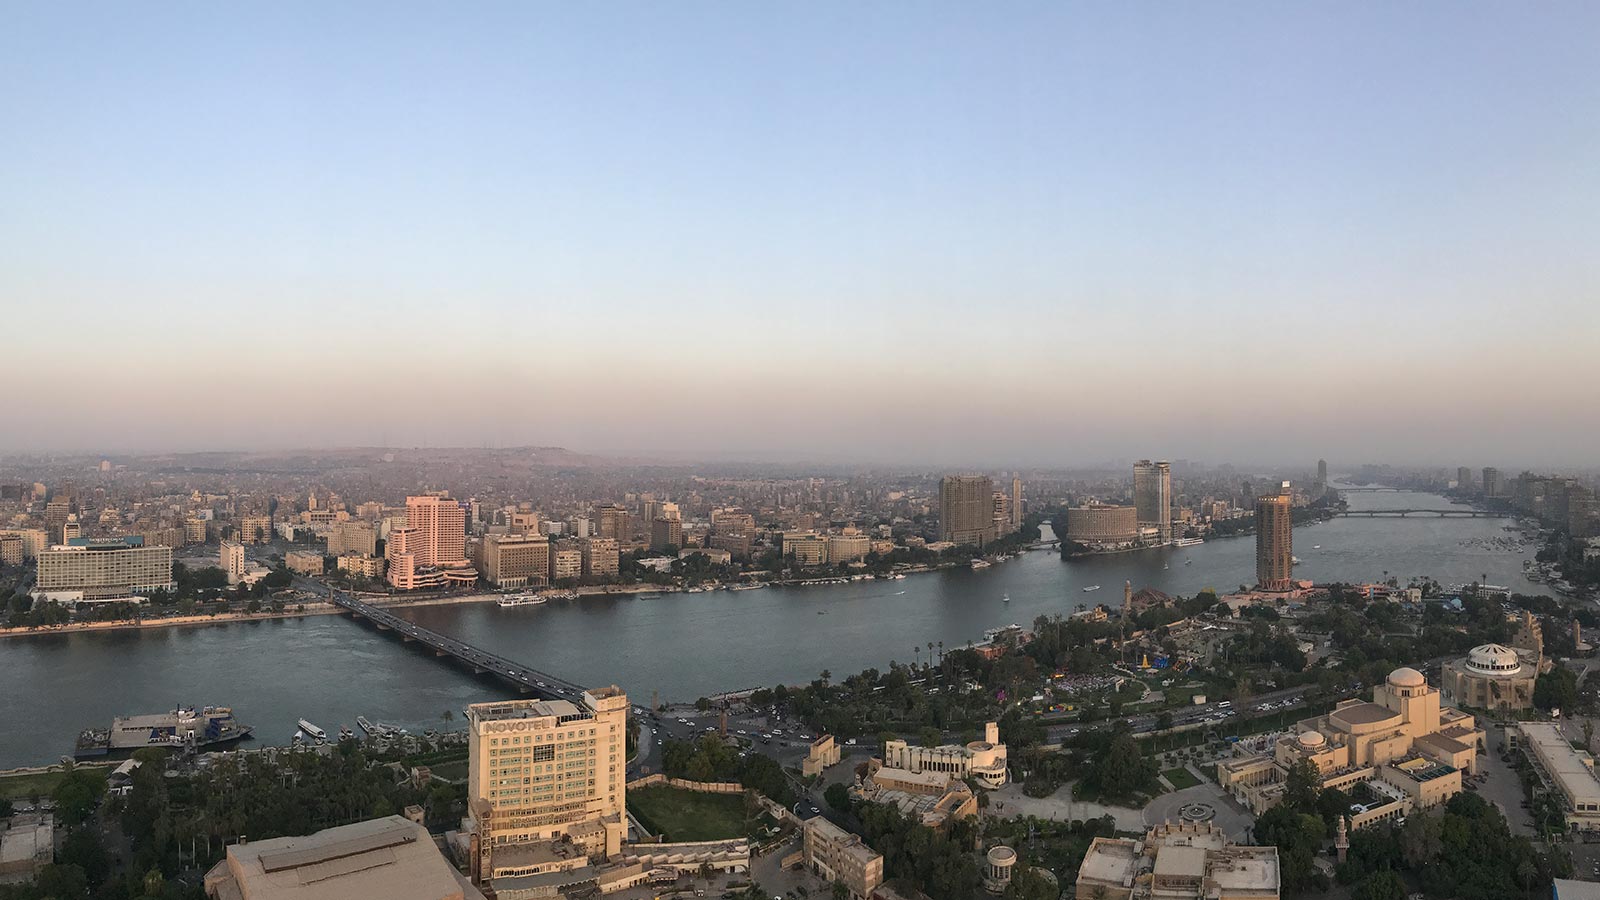 Birds eye view of the Nile River in Cairo, Egypt. Getting inside the Ancient Pyramids of Giza